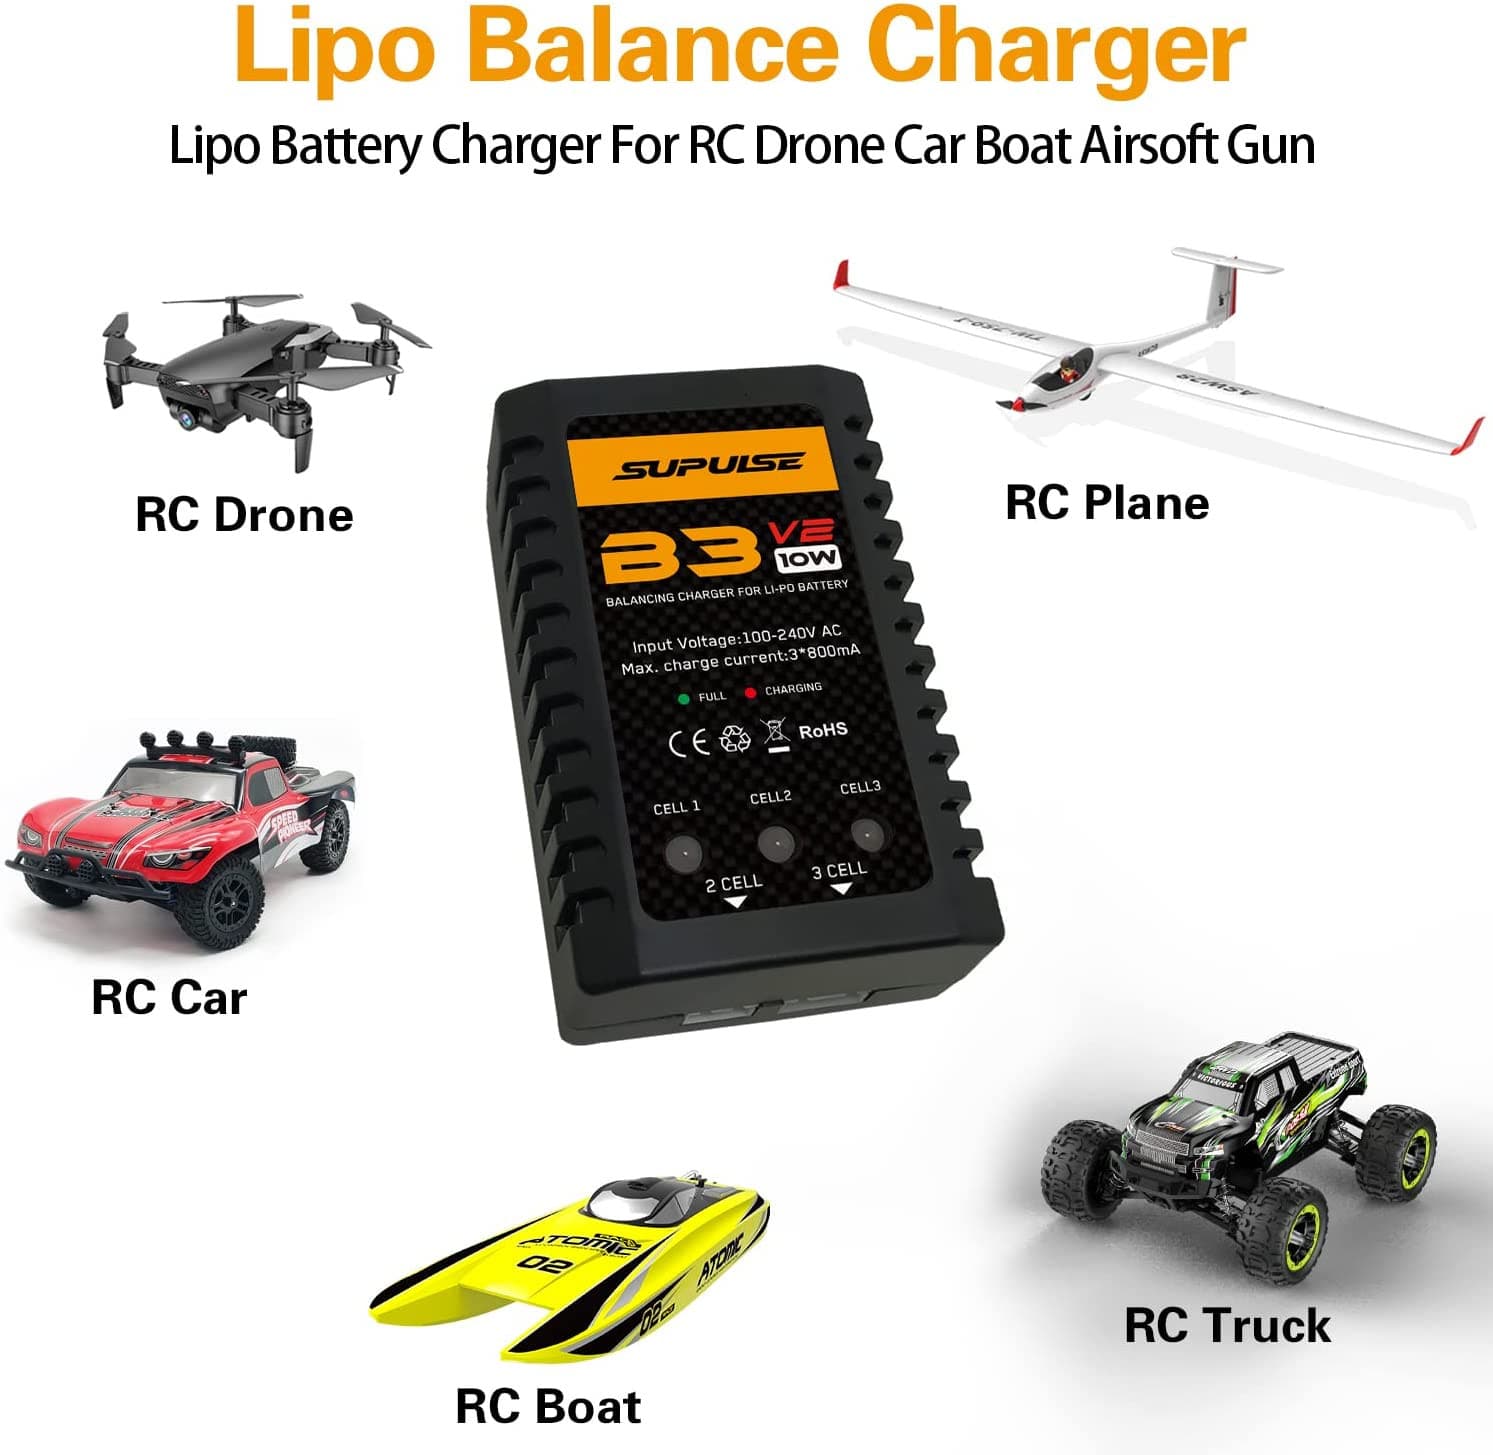 SUPULSE LiPo Battery Charger RC Balance Charger AC 7.4-11.1V 2S-3S 10W Upgrade Version B3AC Pro Compact Charger Lipo Charger (B3V2) - EXHOBBY